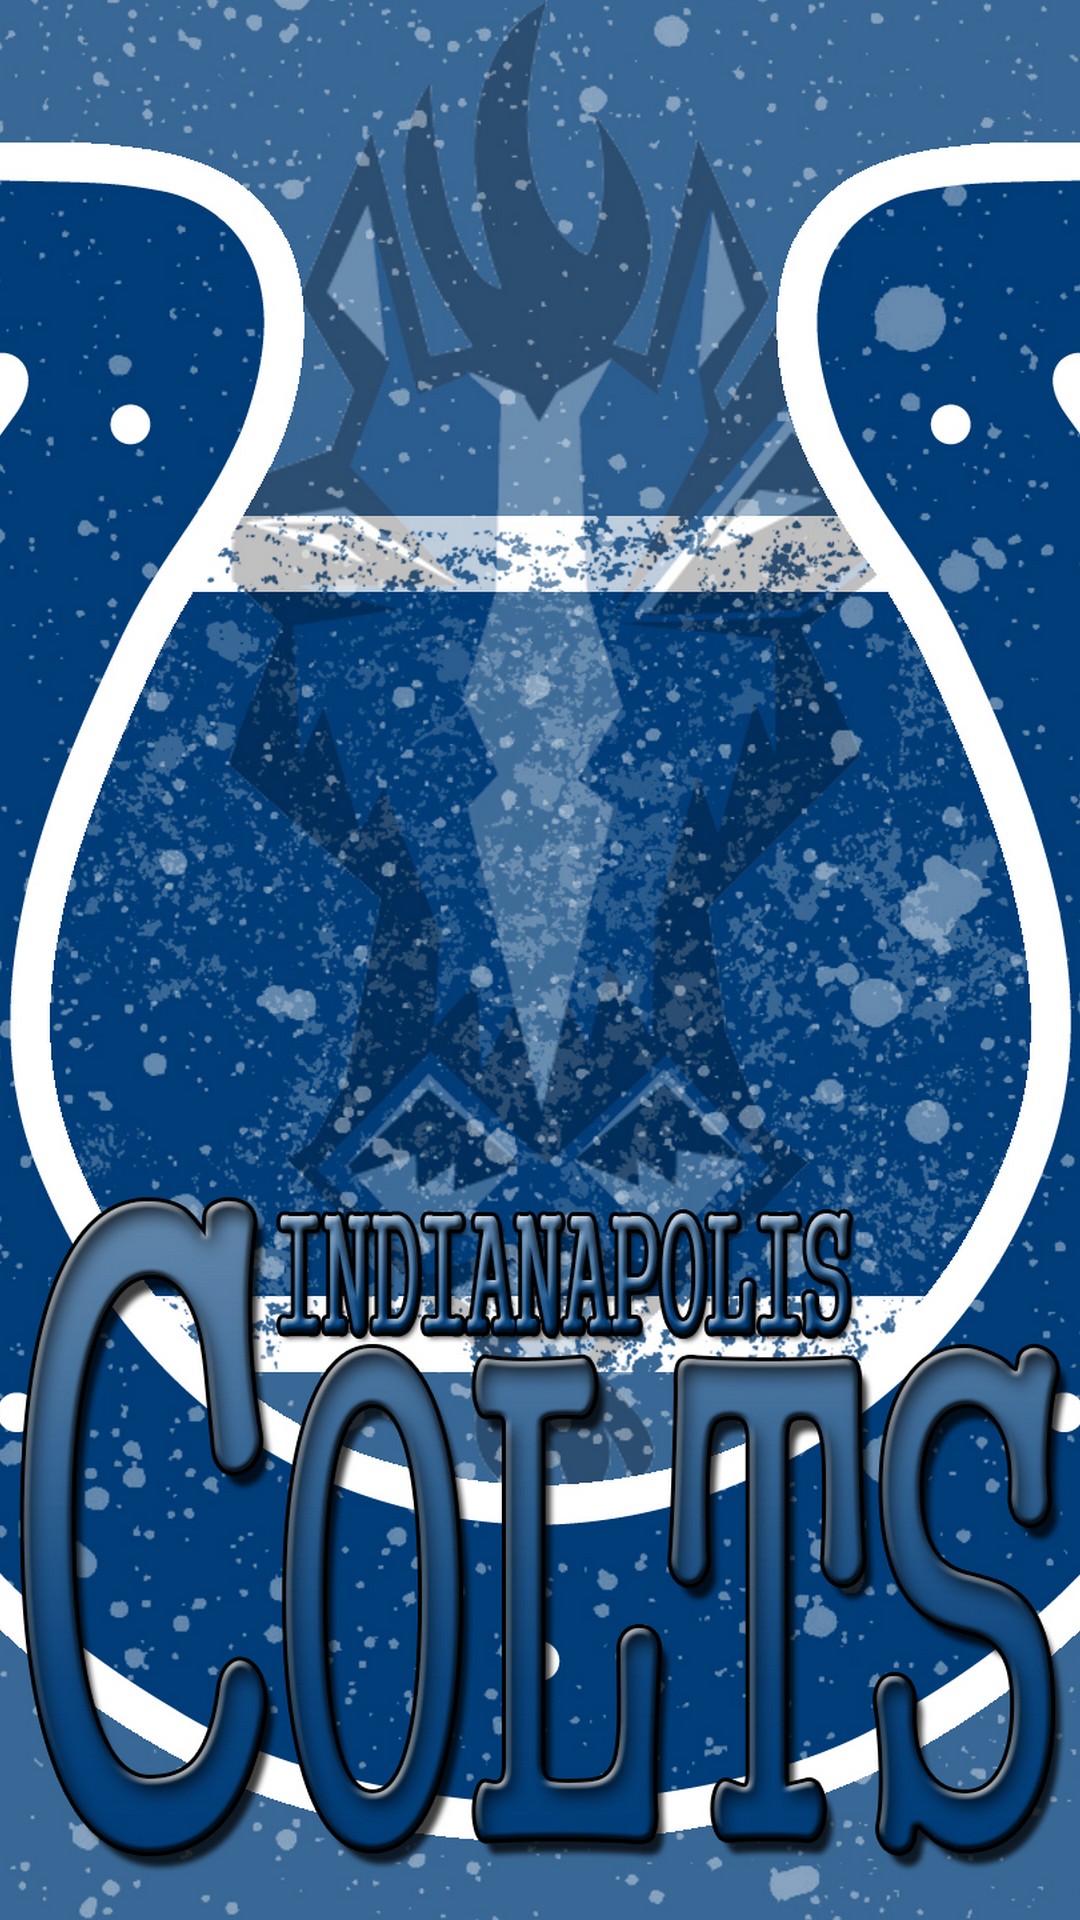 Indianapolis Colts HD Wallpaper For iPhone with high-resolution 1080x1920 pixel. You can use this wallpaper for your Mac or Windows Desktop Background, iPhone, Android or Tablet and another Smartphone device